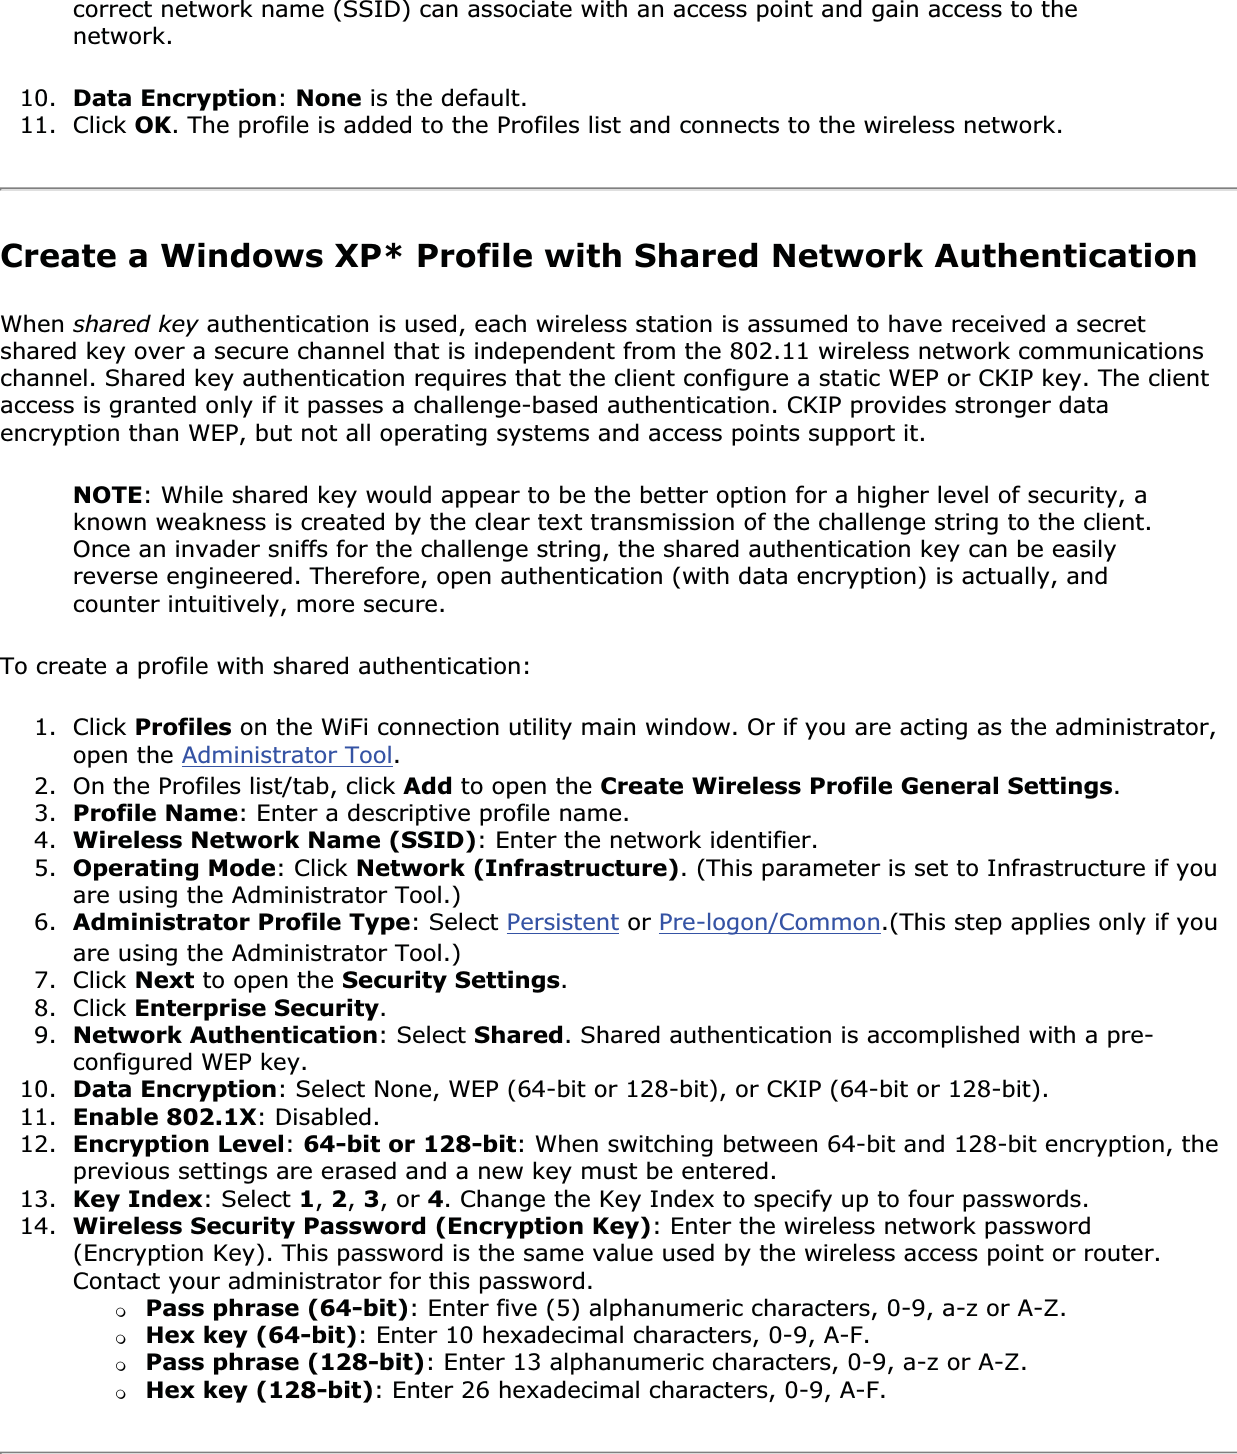 correct network name (SSID) can associate with an access point and gain access to the network.10. Data Encryption:None is the default.11. Click OK. The profile is added to the Profiles list and connects to the wireless network.Create a Windows XP* Profile with Shared Network AuthenticationWhen shared key authentication is used, each wireless station is assumed to have received a secret shared key over a secure channel that is independent from the 802.11 wireless network communications channel. Shared key authentication requires that the client configure a static WEP or CKIP key. The client access is granted only if it passes a challenge-based authentication. CKIP provides stronger data encryption than WEP, but not all operating systems and access points support it.NOTE: While shared key would appear to be the better option for a higher level of security, a known weakness is created by the clear text transmission of the challenge string to the client. Once an invader sniffs for the challenge string, the shared authentication key can be easily reverse engineered. Therefore, open authentication (with data encryption) is actually, and counter intuitively, more secure.To create a profile with shared authentication:1. Click Profiles on the WiFi connection utility main window. Or if you are acting as the administrator, open the Administrator Tool.2. On the Profiles list/tab, click Add to open the Create Wireless Profile General Settings.3. Profile Name: Enter a descriptive profile name.4. Wireless Network Name (SSID): Enter the network identifier.5. Operating Mode: Click Network (Infrastructure). (This parameter is set to Infrastructure if you are using the Administrator Tool.)6. Administrator Profile Type: Select Persistent or Pre-logon/Common.(This step applies only if you are using the Administrator Tool.)7. Click Next to open the Security Settings.8. Click Enterprise Security.9. Network Authentication: Select Shared. Shared authentication is accomplished with a pre-configured WEP key.10. Data Encryption: Select None, WEP (64-bit or 128-bit), or CKIP (64-bit or 128-bit).11. Enable 802.1X: Disabled.12. Encryption Level:64-bit or 128-bit: When switching between 64-bit and 128-bit encryption, the previous settings are erased and a new key must be entered. 13. Key Index: Select 1, 2,3, or 4. Change the Key Index to specify up to four passwords.14. Wireless Security Password (Encryption Key): Enter the wireless network password (Encryption Key). This password is the same value used by the wireless access point or router. Contact your administrator for this password. ❍Pass phrase (64-bit): Enter five (5) alphanumeric characters, 0-9, a-z or A-Z.❍Hex key (64-bit): Enter 10 hexadecimal characters, 0-9, A-F.❍Pass phrase (128-bit): Enter 13 alphanumeric characters, 0-9, a-z or A-Z. ❍Hex key (128-bit): Enter 26 hexadecimal characters, 0-9, A-F.